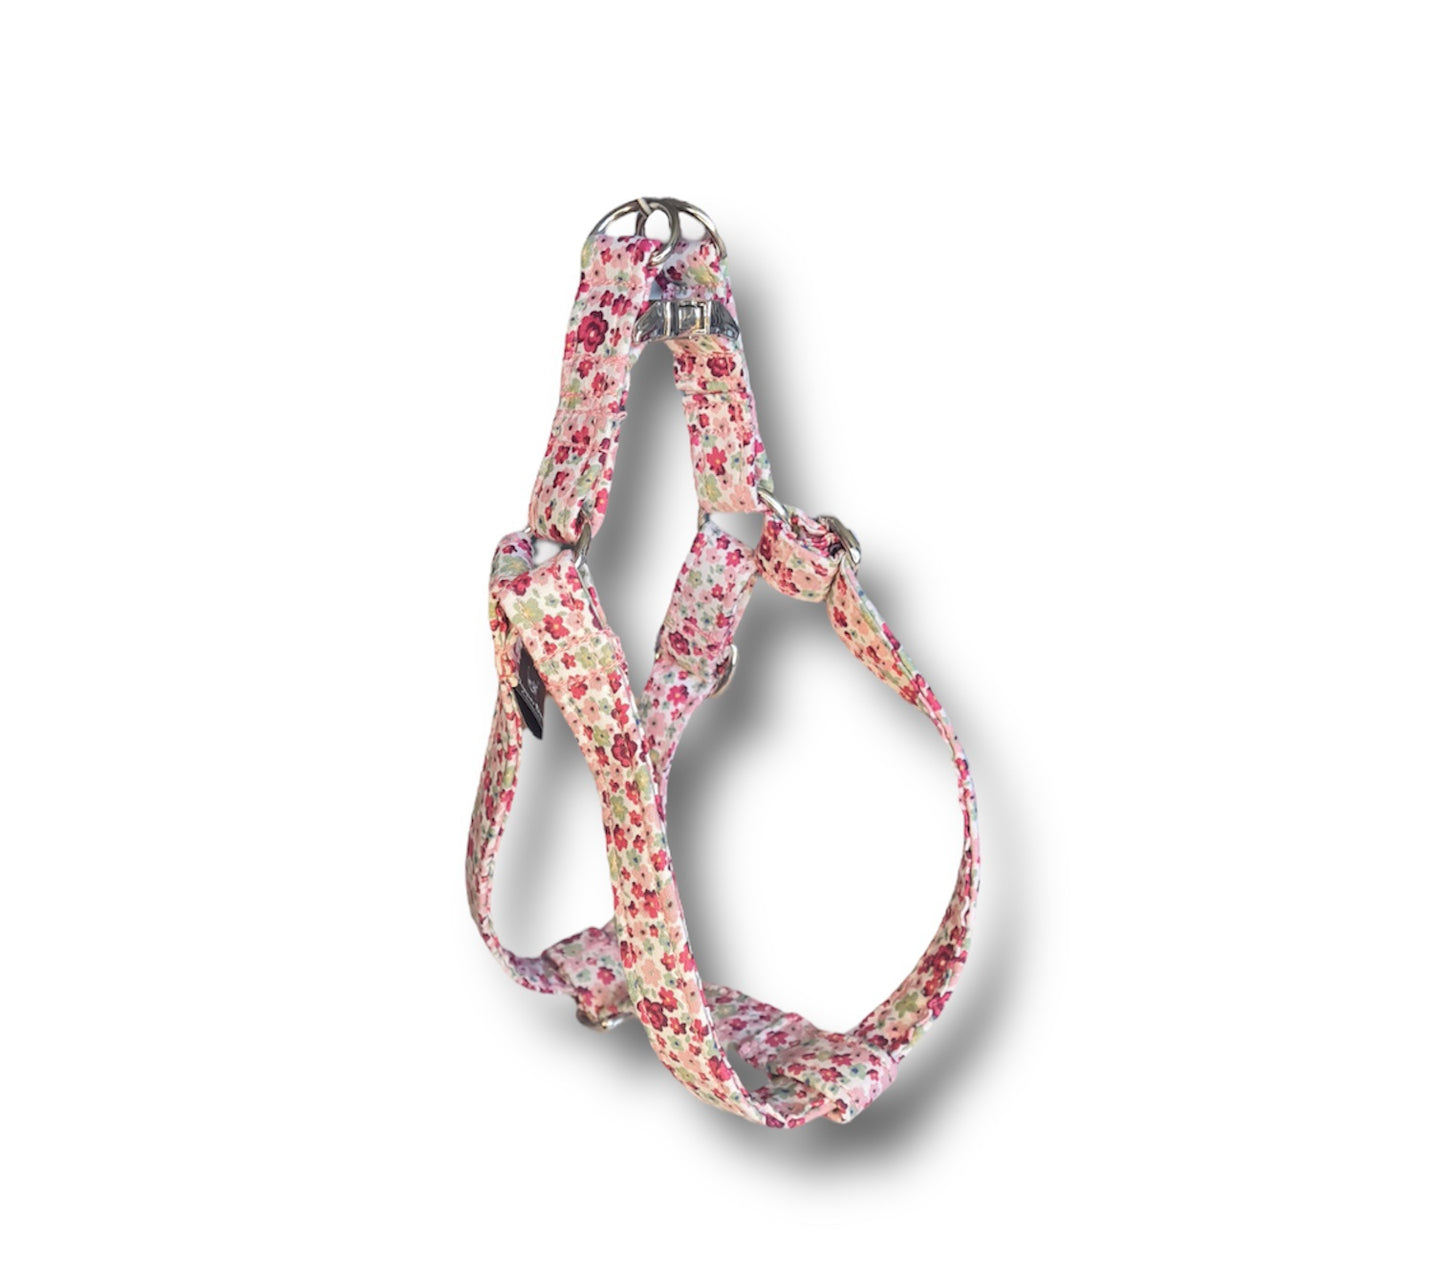 Adjustable step in dog harness - Pink ditsy